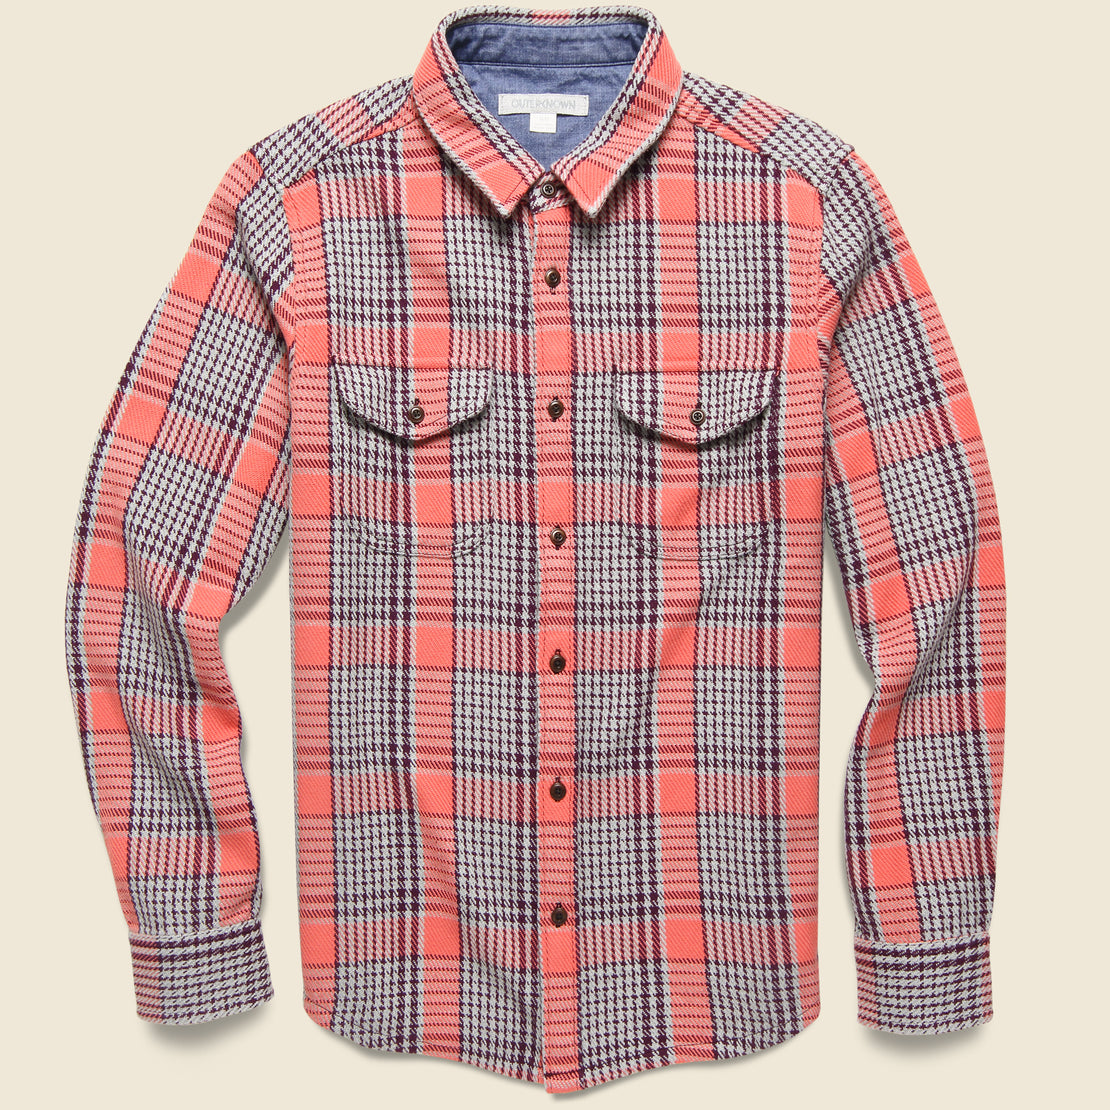 Outerknown Blanket Shirt - Bright Coral Graph Plaid